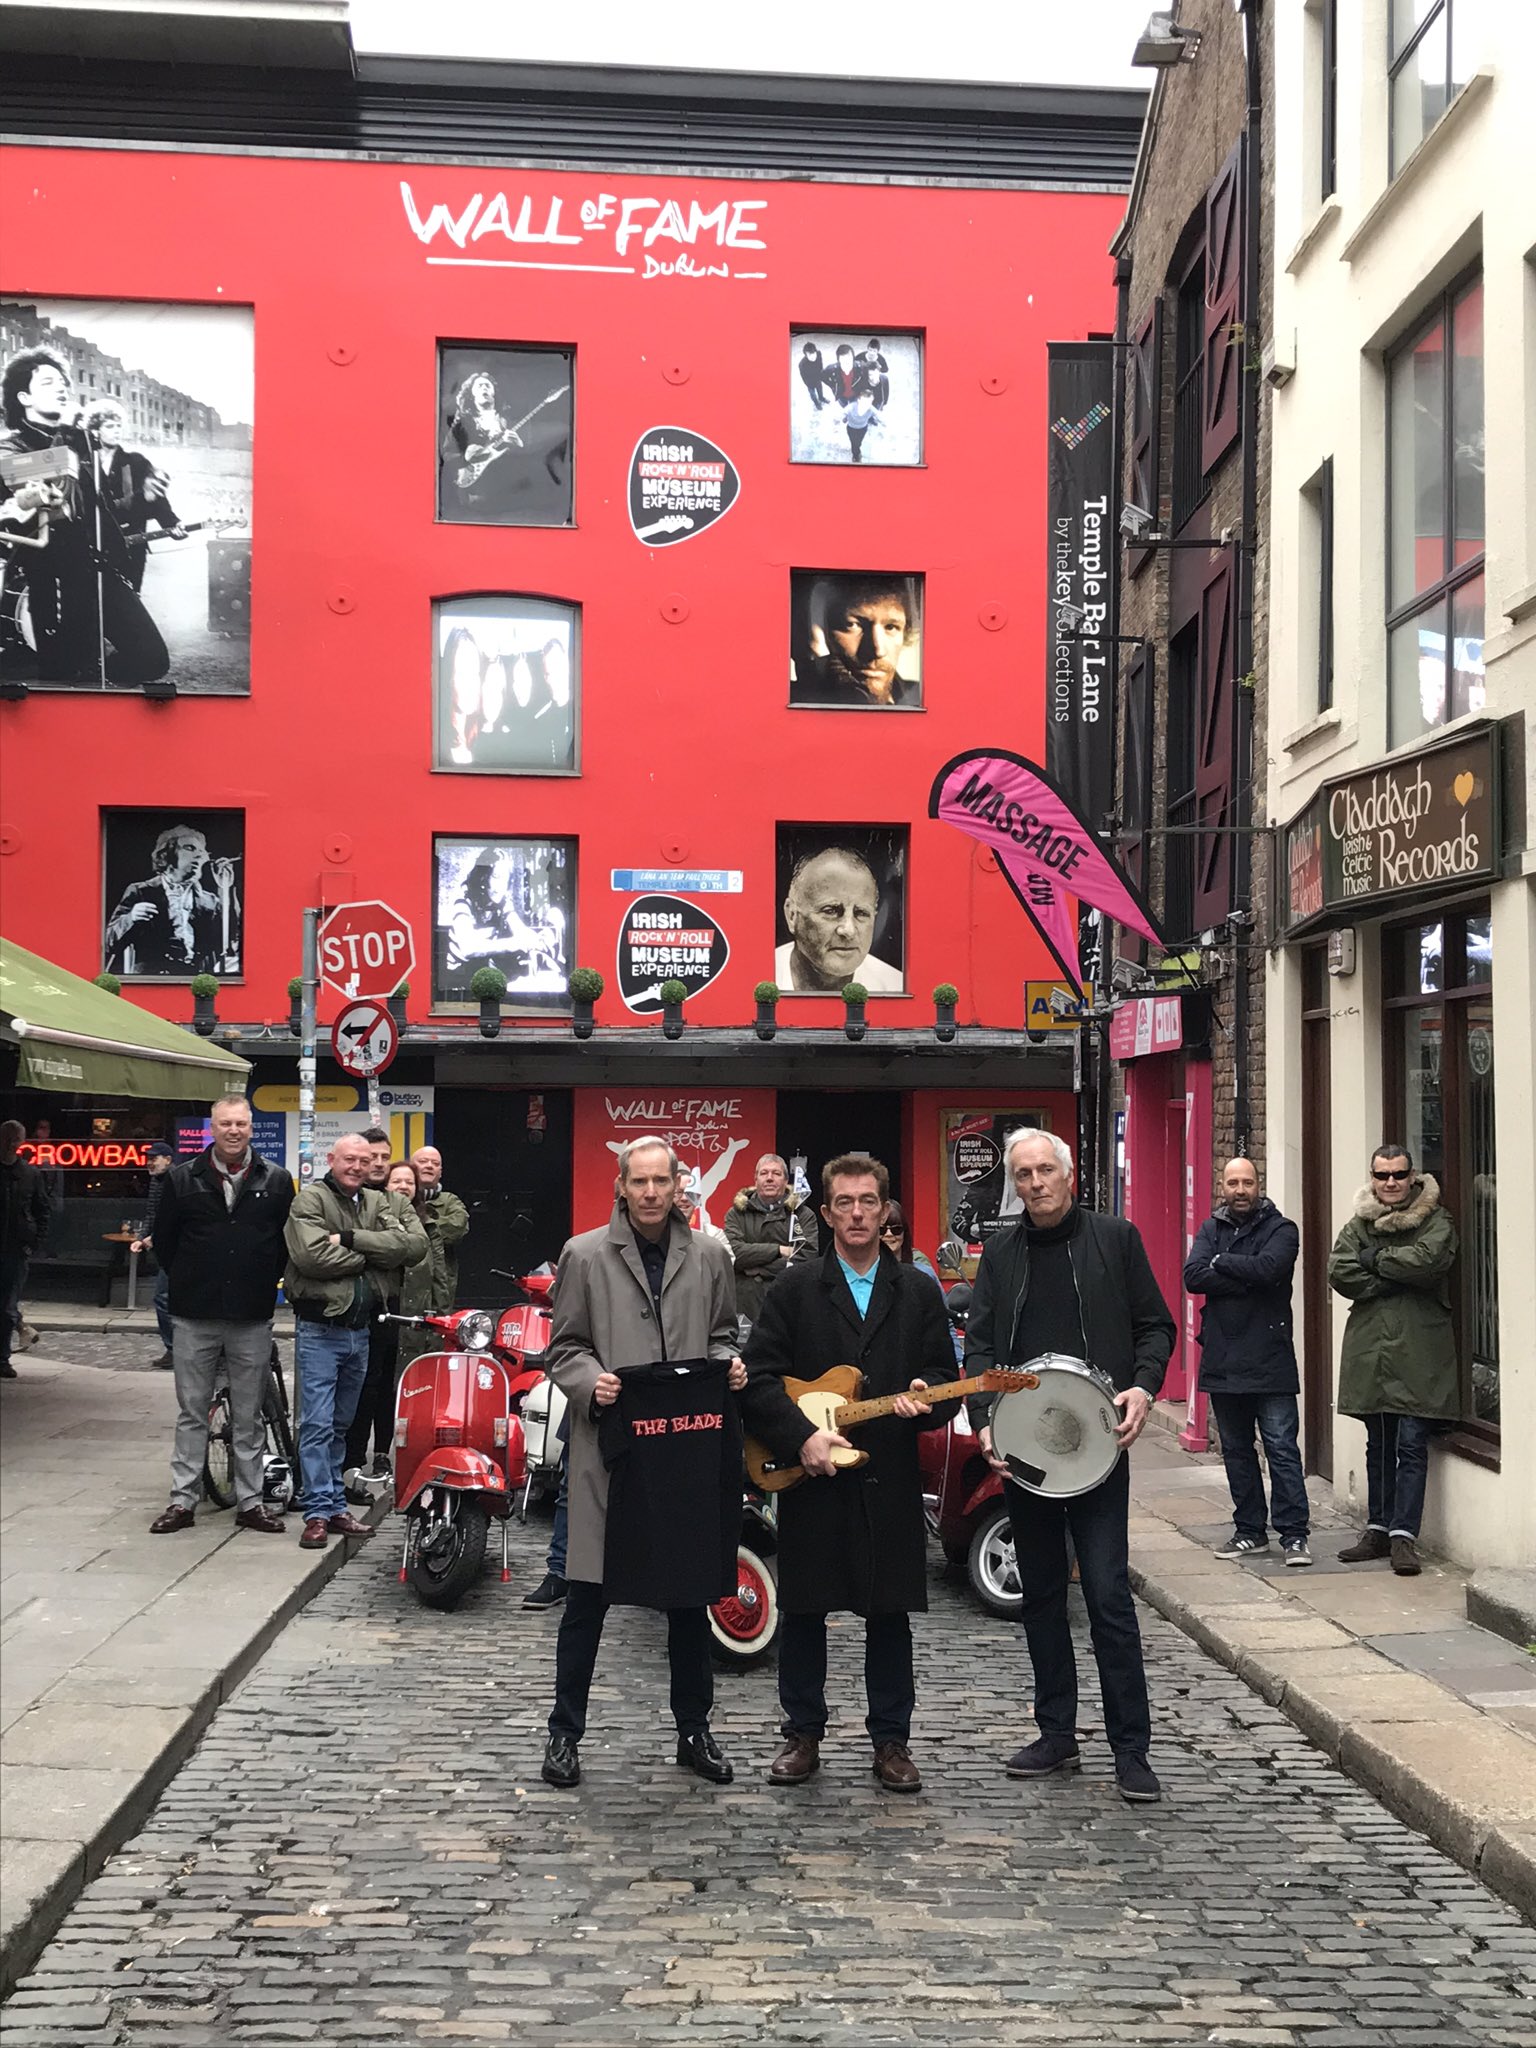 Irish Rock Museum on Twitter: "Huge day w/ @TheBladesBand today as we  induct then into our museum hall of fame! We'll add their donations next  year so keep an eye out. Make